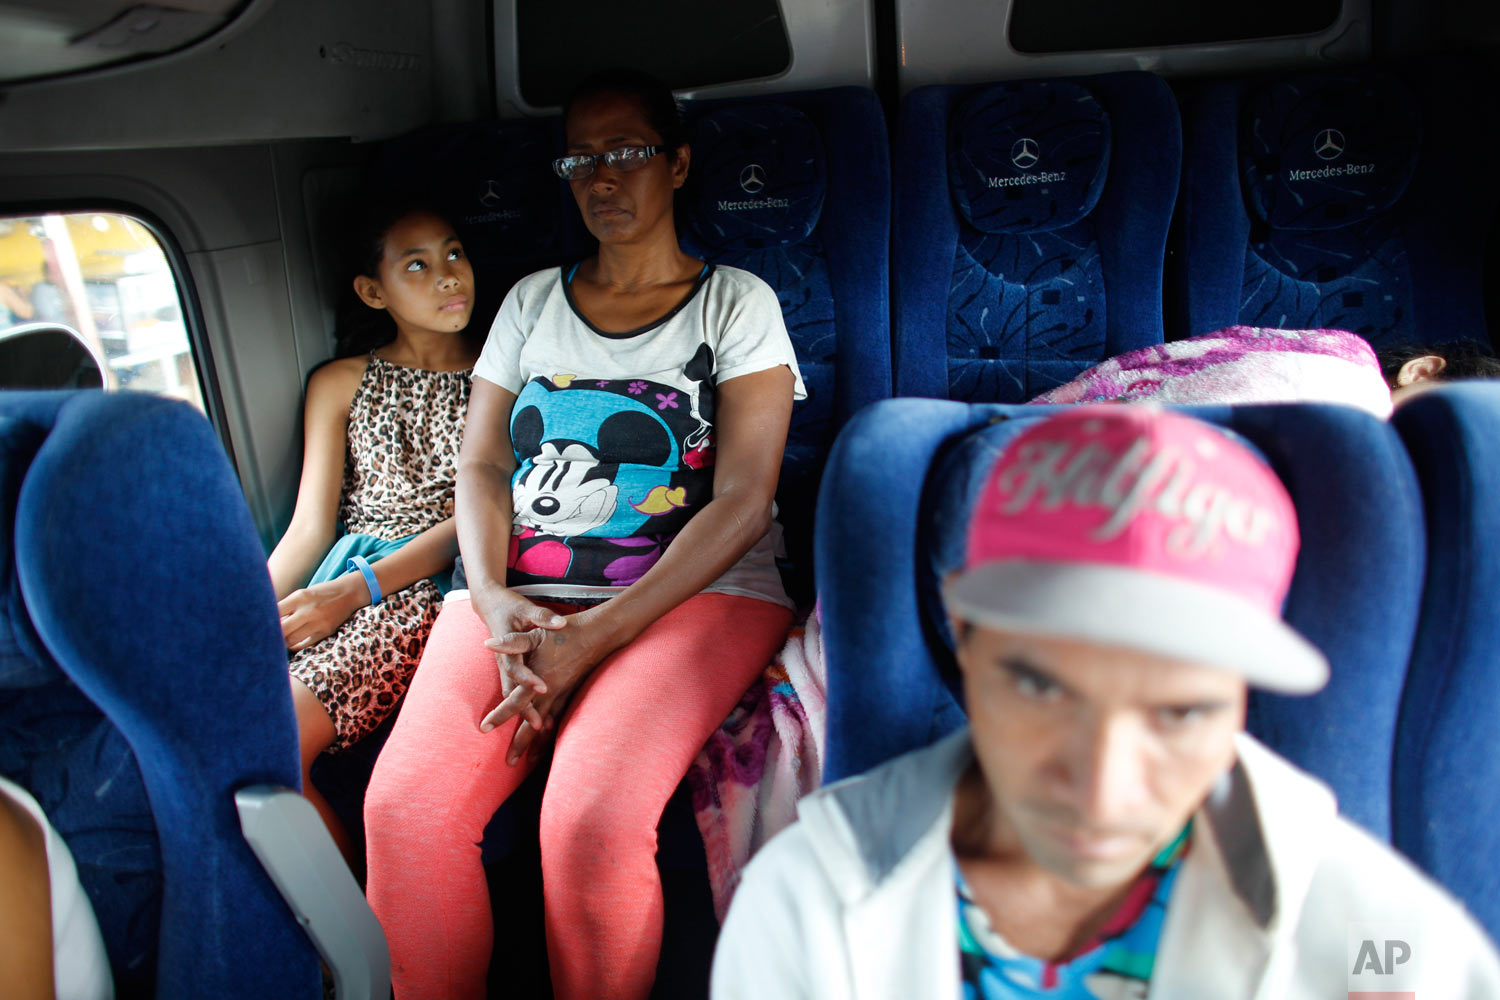  In this Sept. 4, 2018 photo, 10-year-old Venezuelan Angelis looks up at her mother Sandra Cadiz on the back of a bus at the stop in San Juan de la Paz, Colombia, on their journey to Peru. It was in San Juan De La Paz that Cadiz decided to switch her